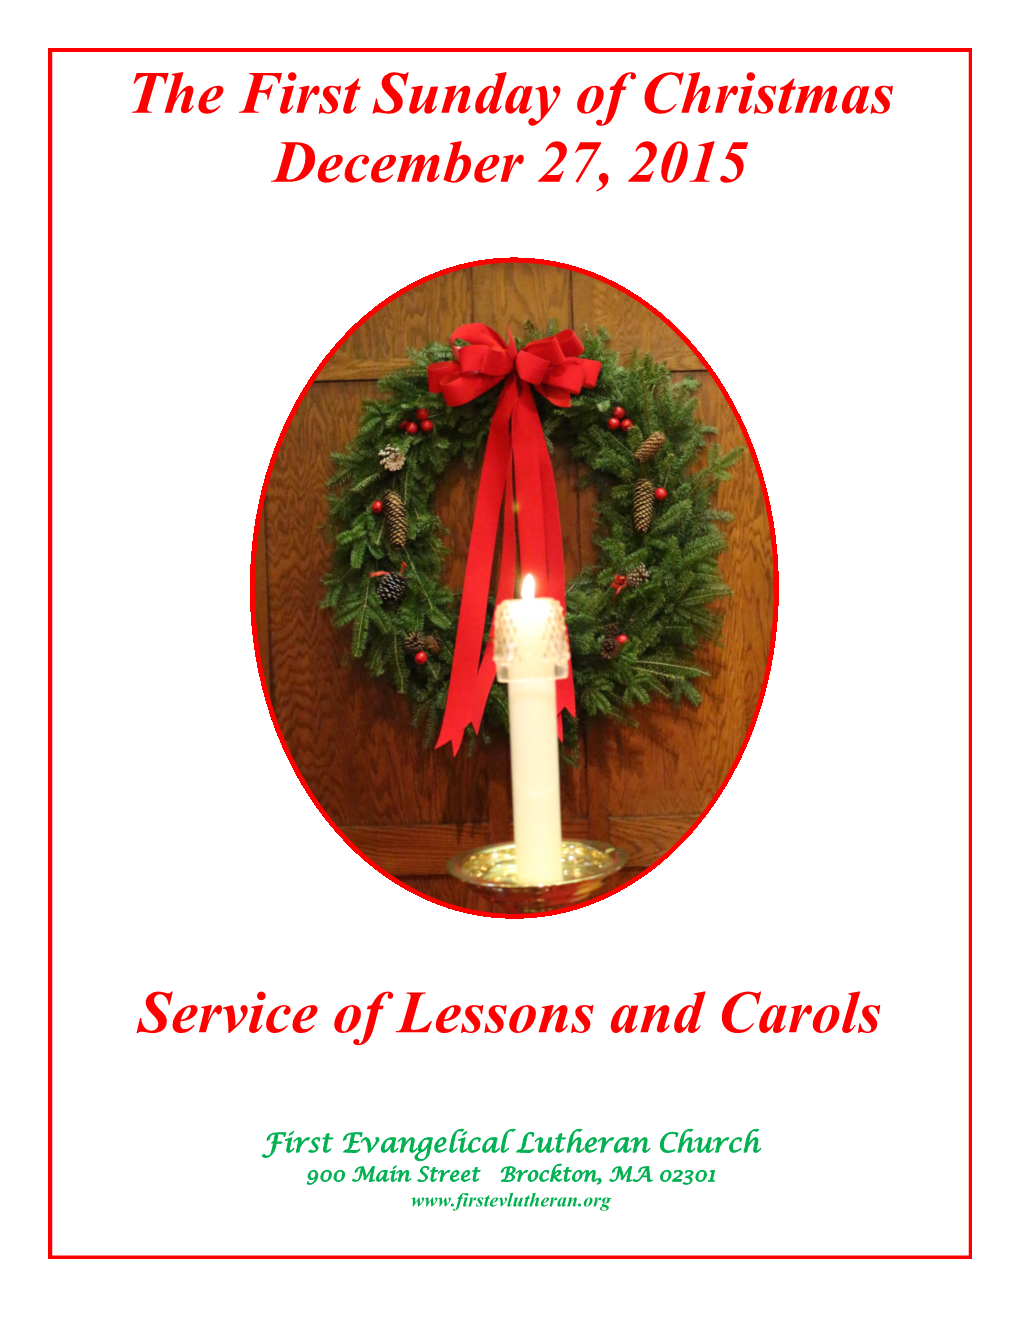 The First Sunday of Christmas December 27, 2015 Service of Lessons and Carols